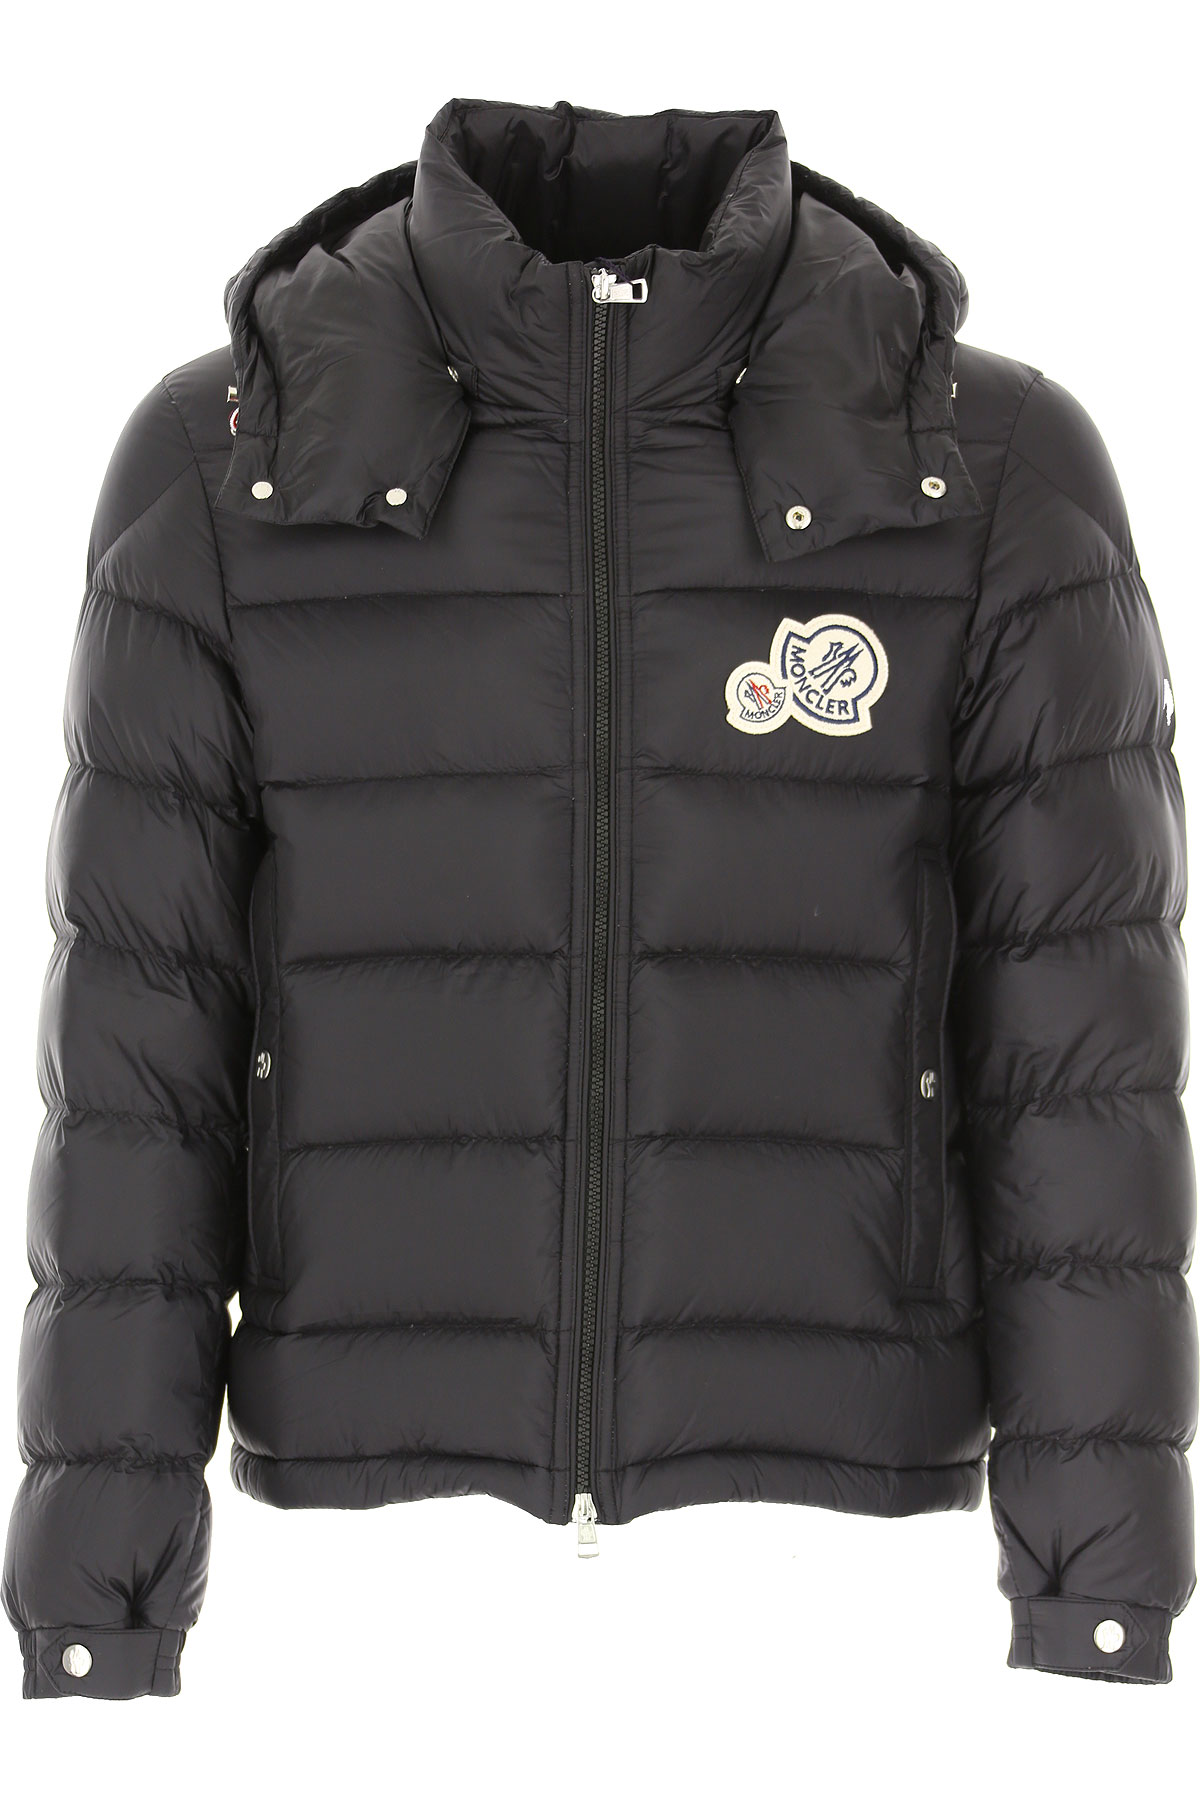 Mens Clothing Moncler, Style code: 418114953334-999-bramant